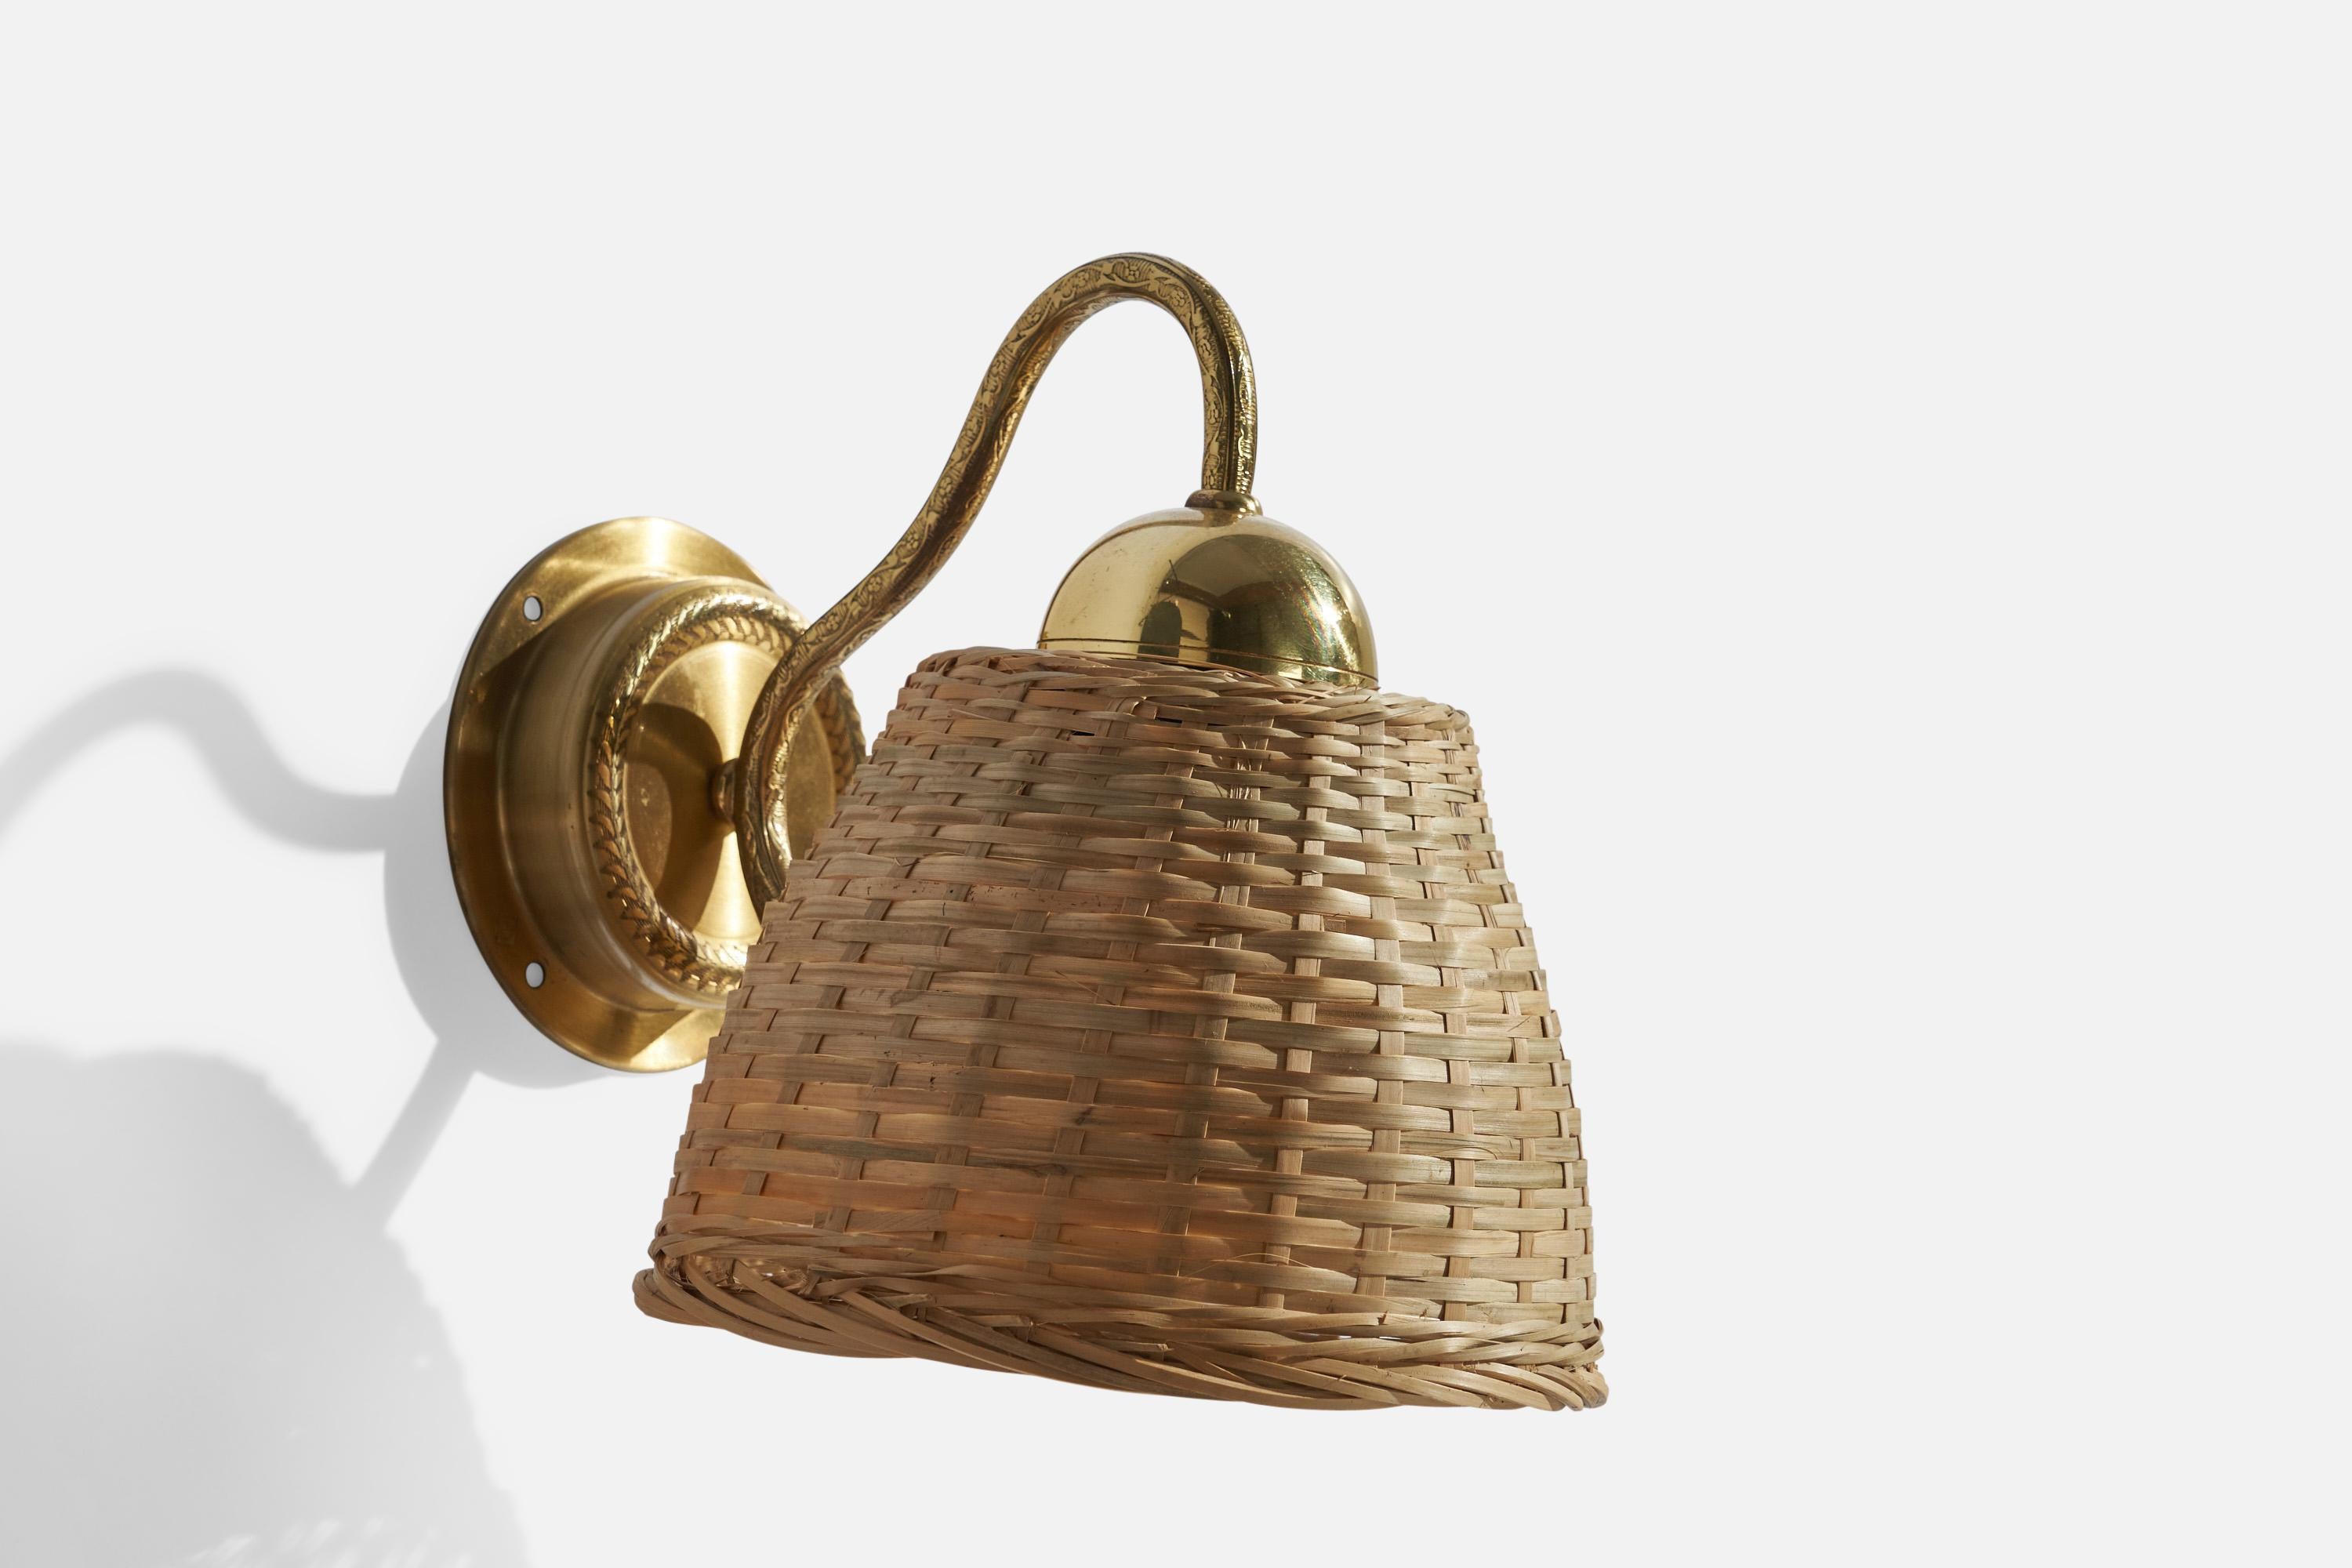 A brass and rattan wall light, designed and produced by EWÅ Värnamo, Sweden, c. 1970s.

Overall Dimensions (inches): 8.5” H x 7” W x 9.5”  D
Back Plate Dimensions (inches): 4.25” H x 4.25” W x 1.0” D
Bulb Specifications: E-26 Bulb
Number of Sockets: